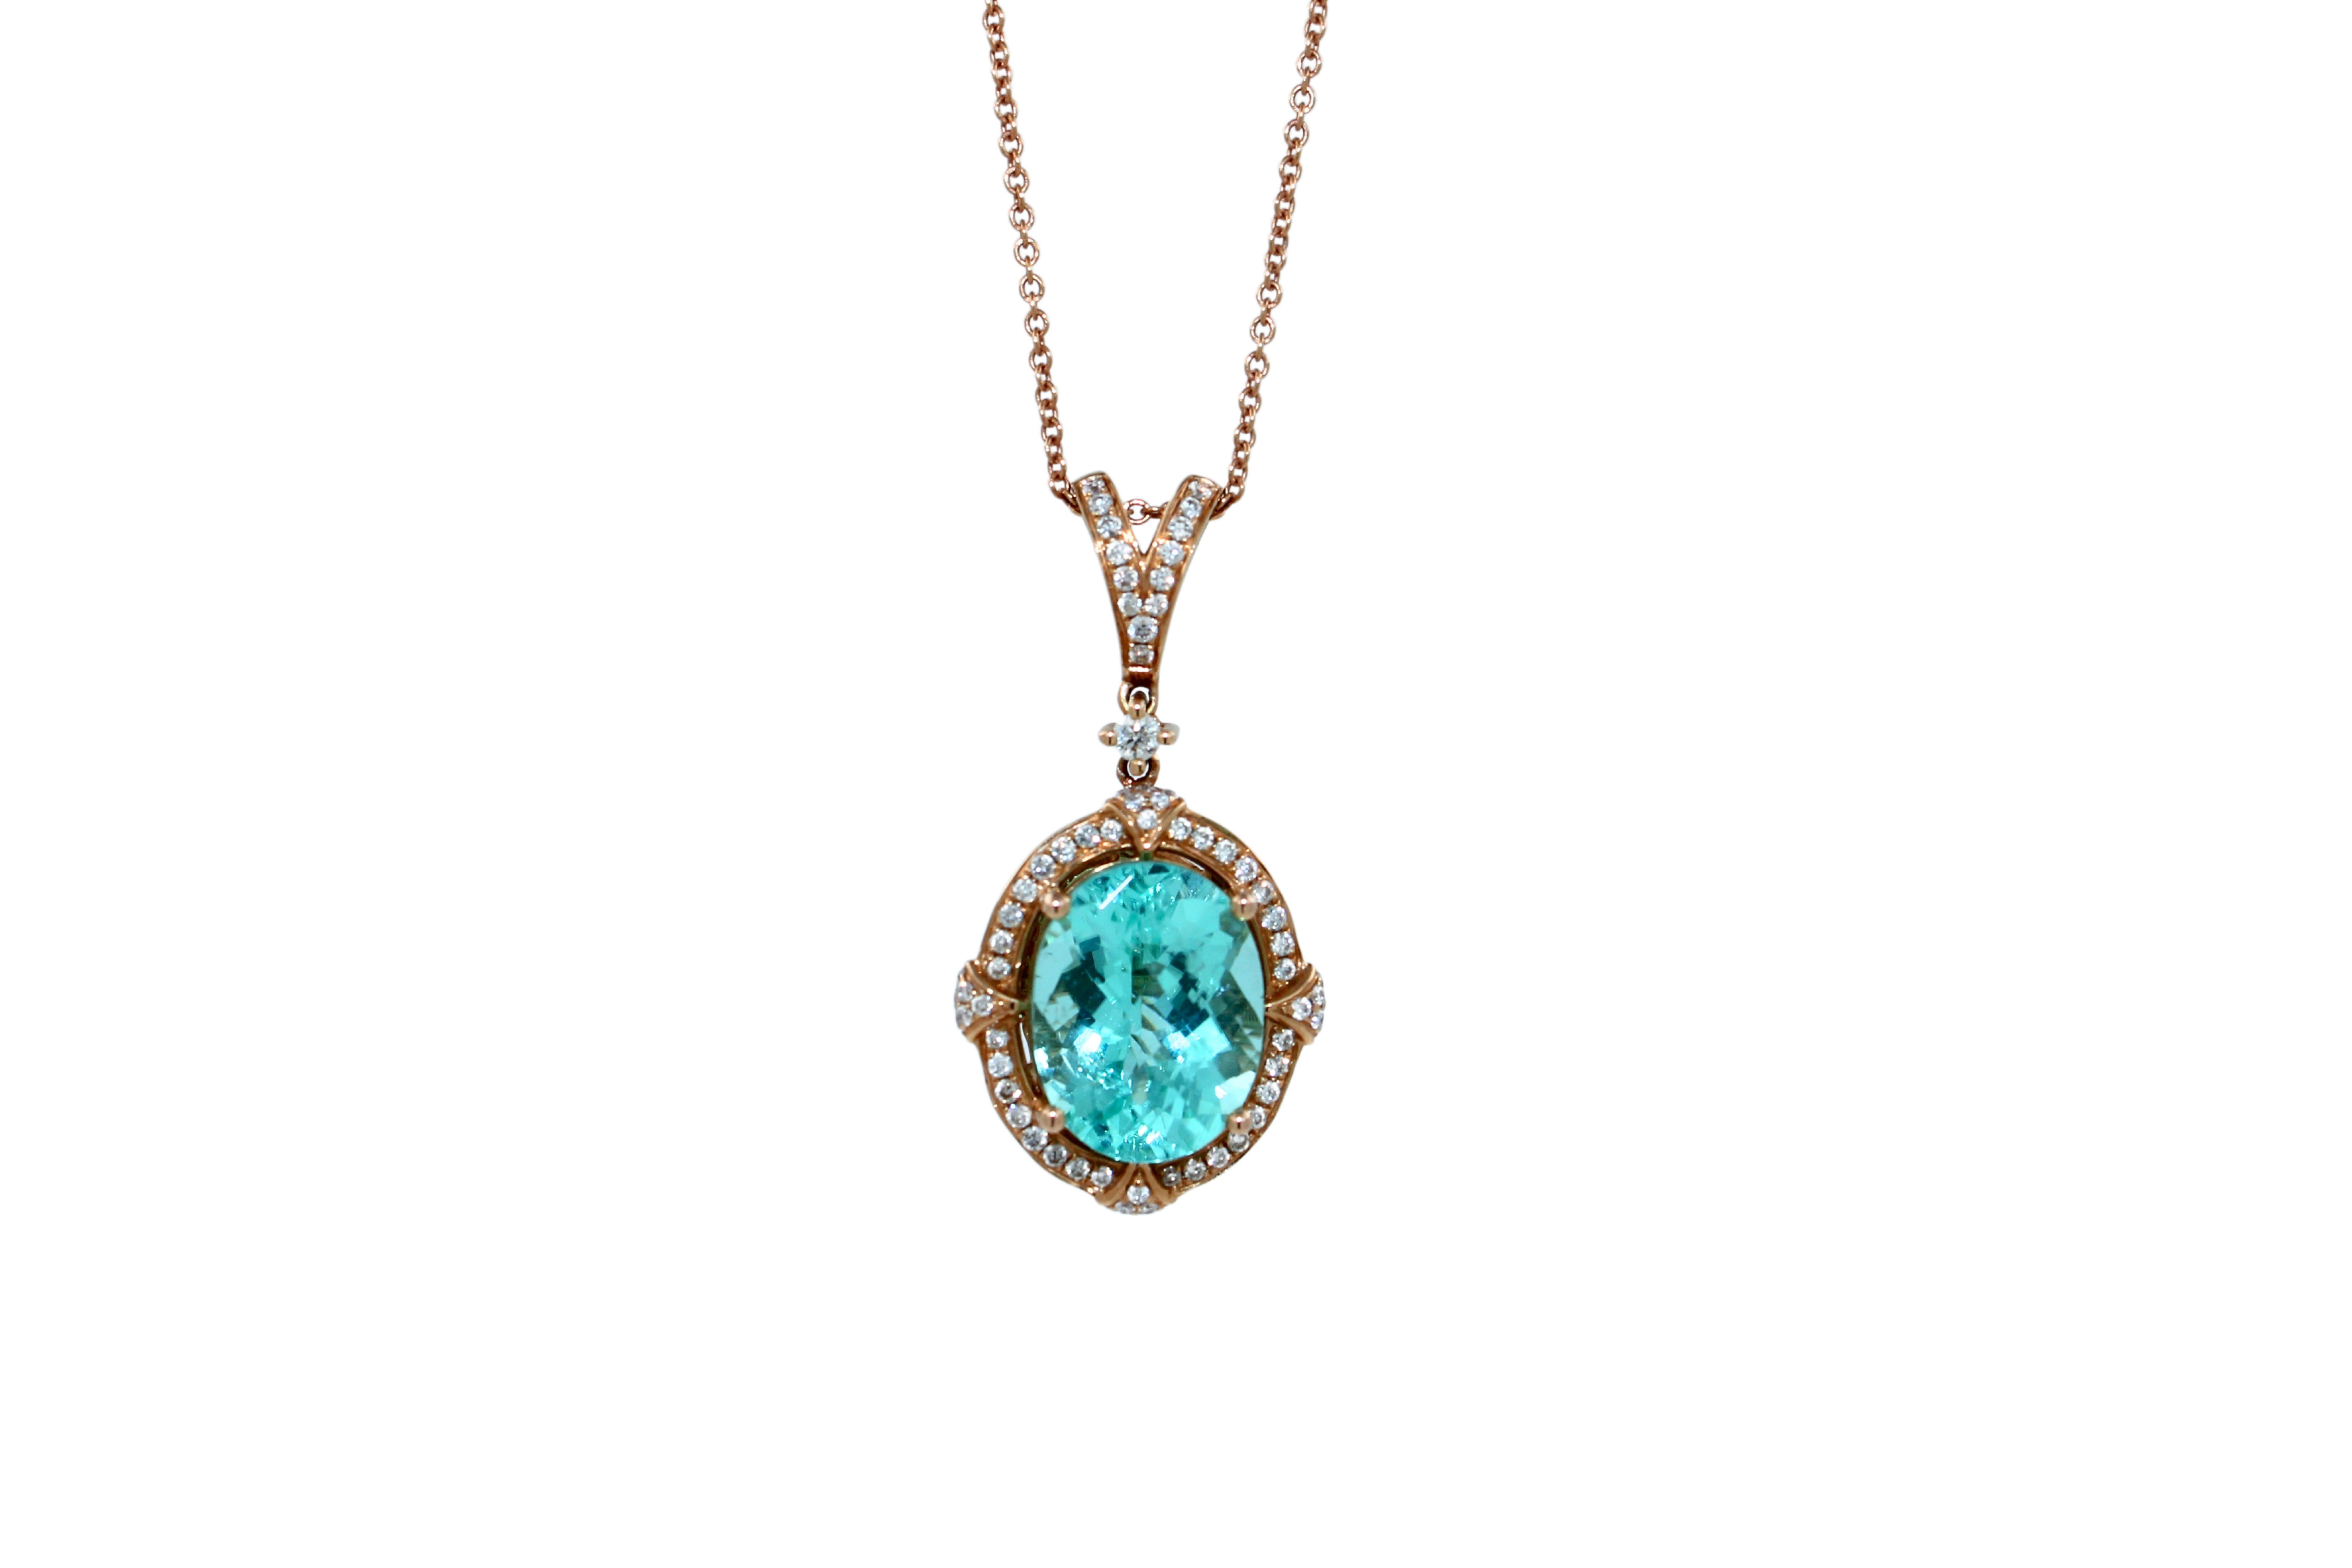 6 Carats Oval Genuine Paraiba Tourmaline 
12.20 x 9.33 mm length width ratio of center gemstone
17 Inches chain length
18K Rose Gold
6.77 Grams Total Weight
1.50 ctw Diamonds G/VS
Extremely Rare Gemstone Type & Quality 